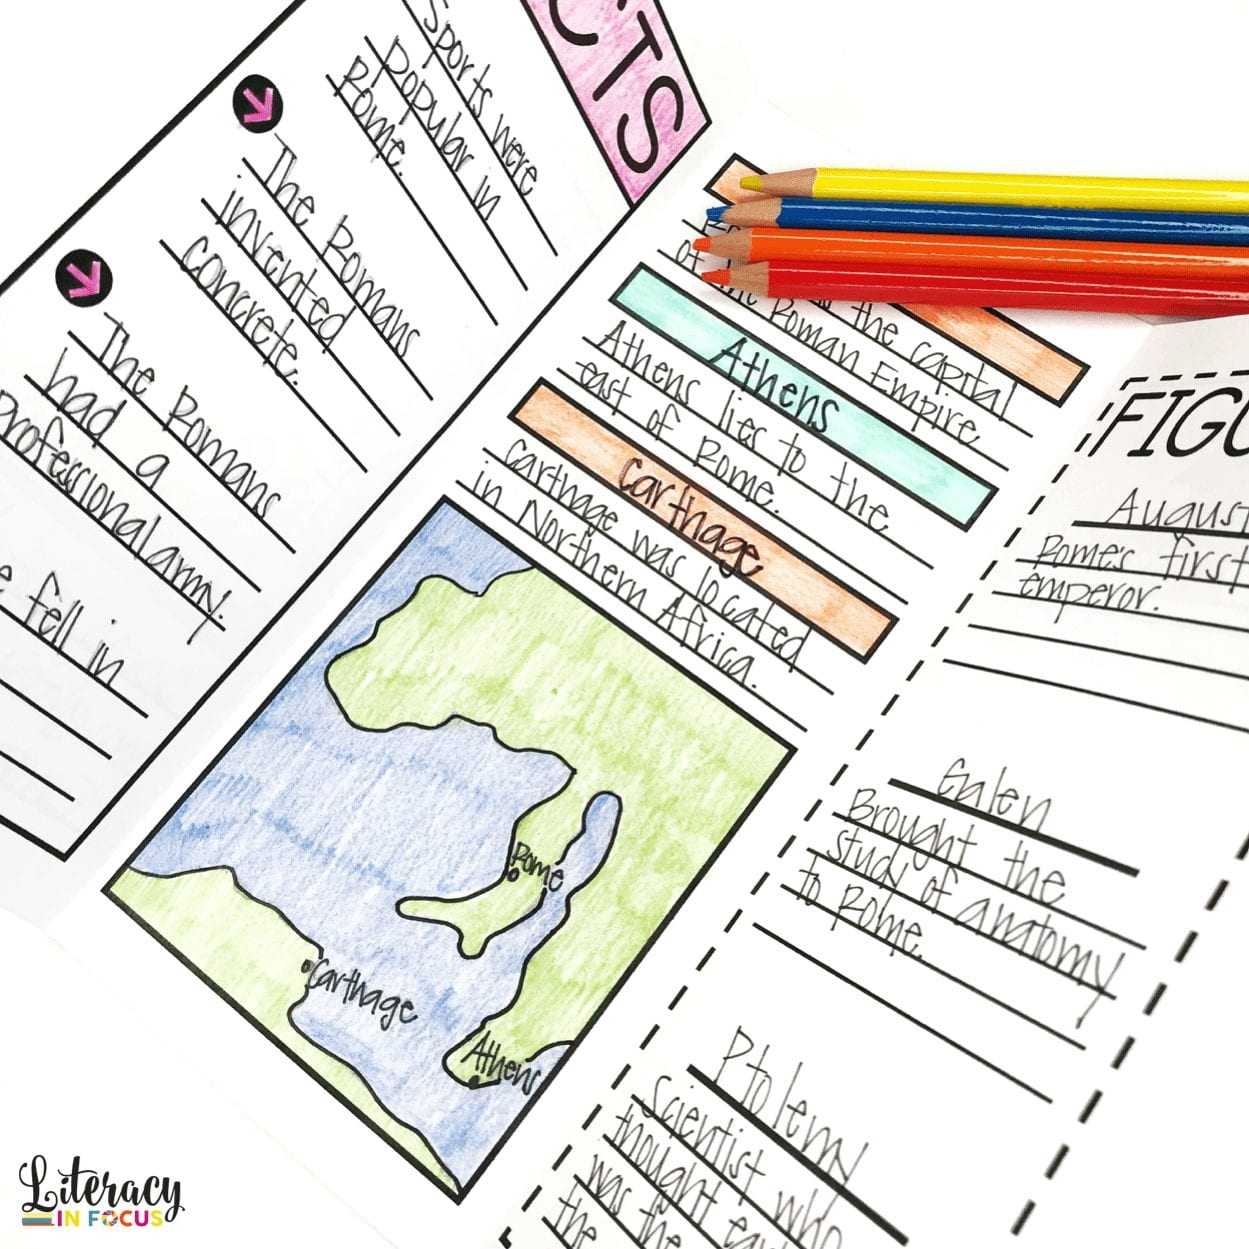 Historical Travel Brochure And Research Project | Literacy Throughout Brochure Rubric Template